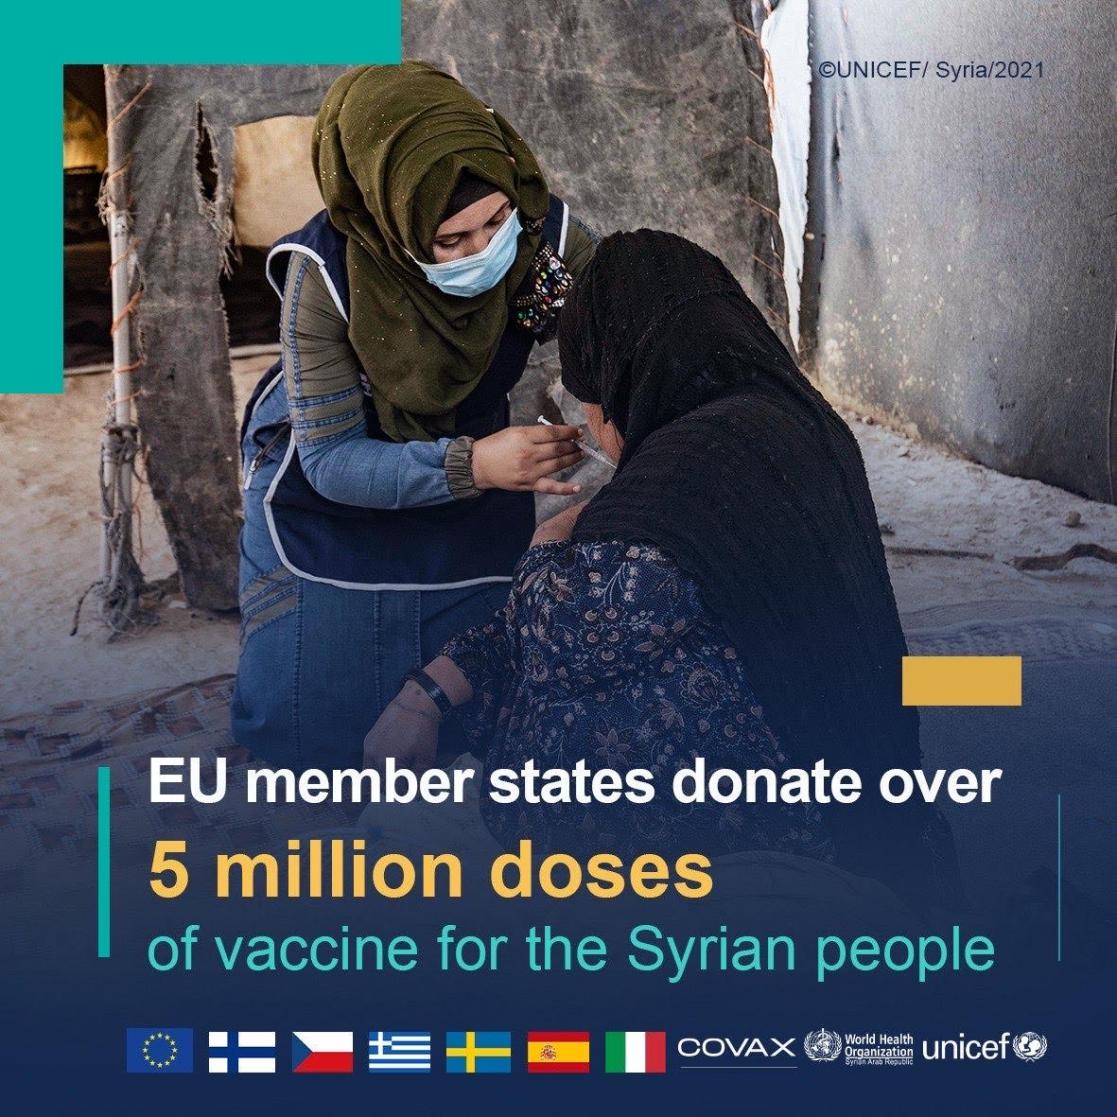 Poster about EU member states donate over 5 million doses of vaccine for the Syrian people